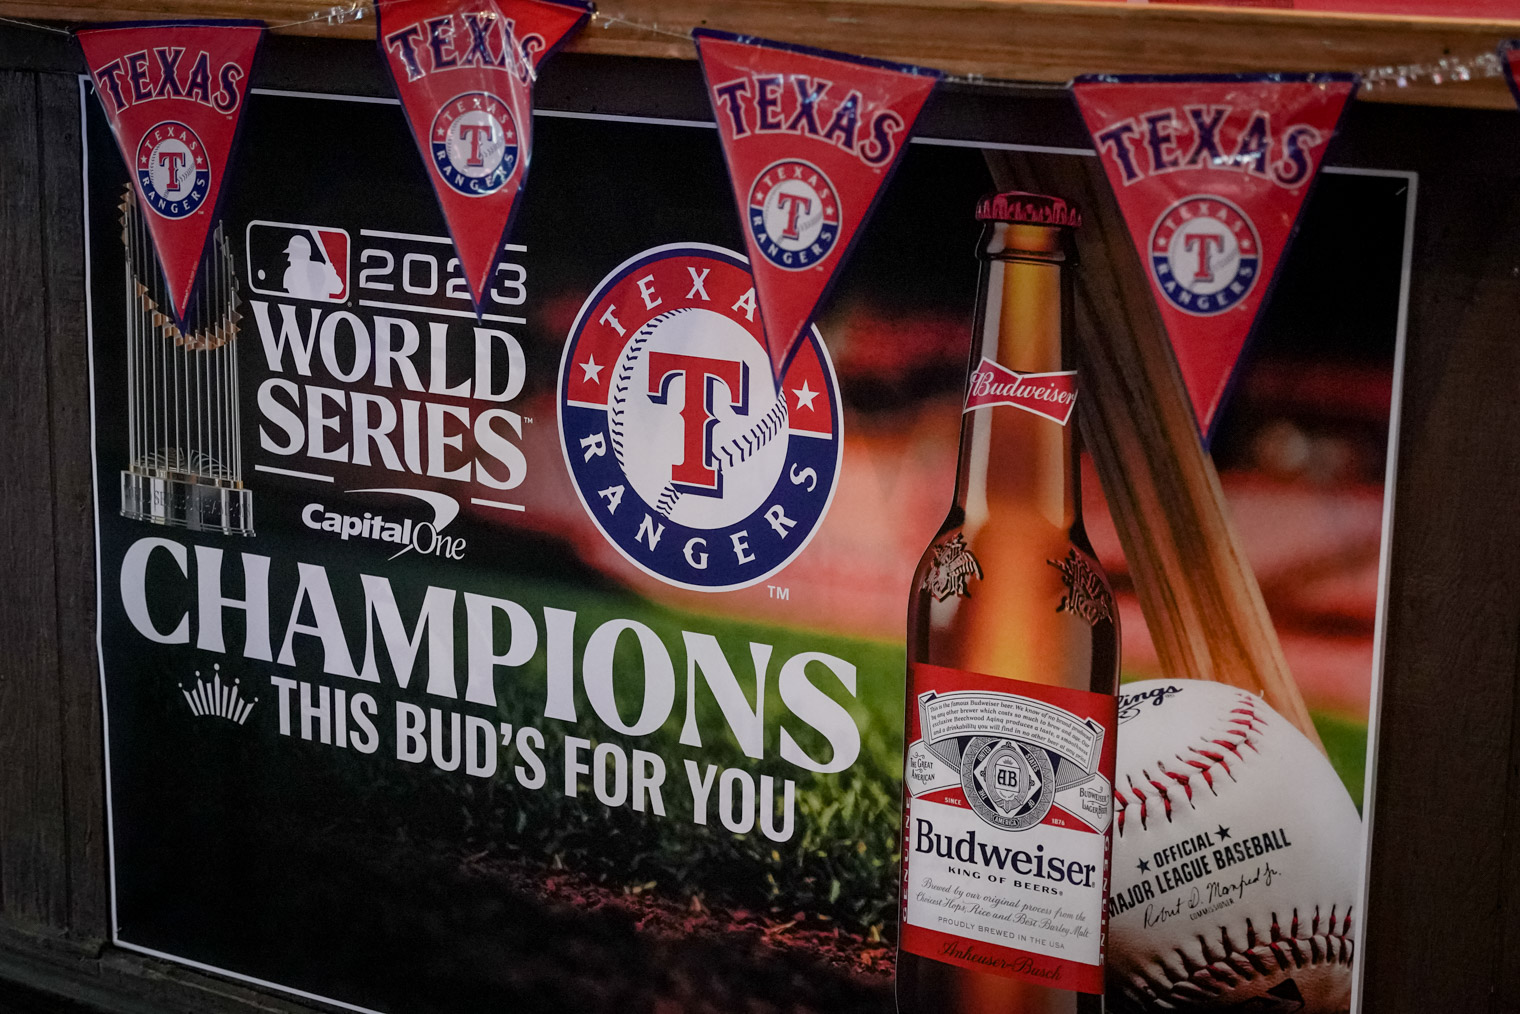 A poster from Budweiser congratulating the world series champions